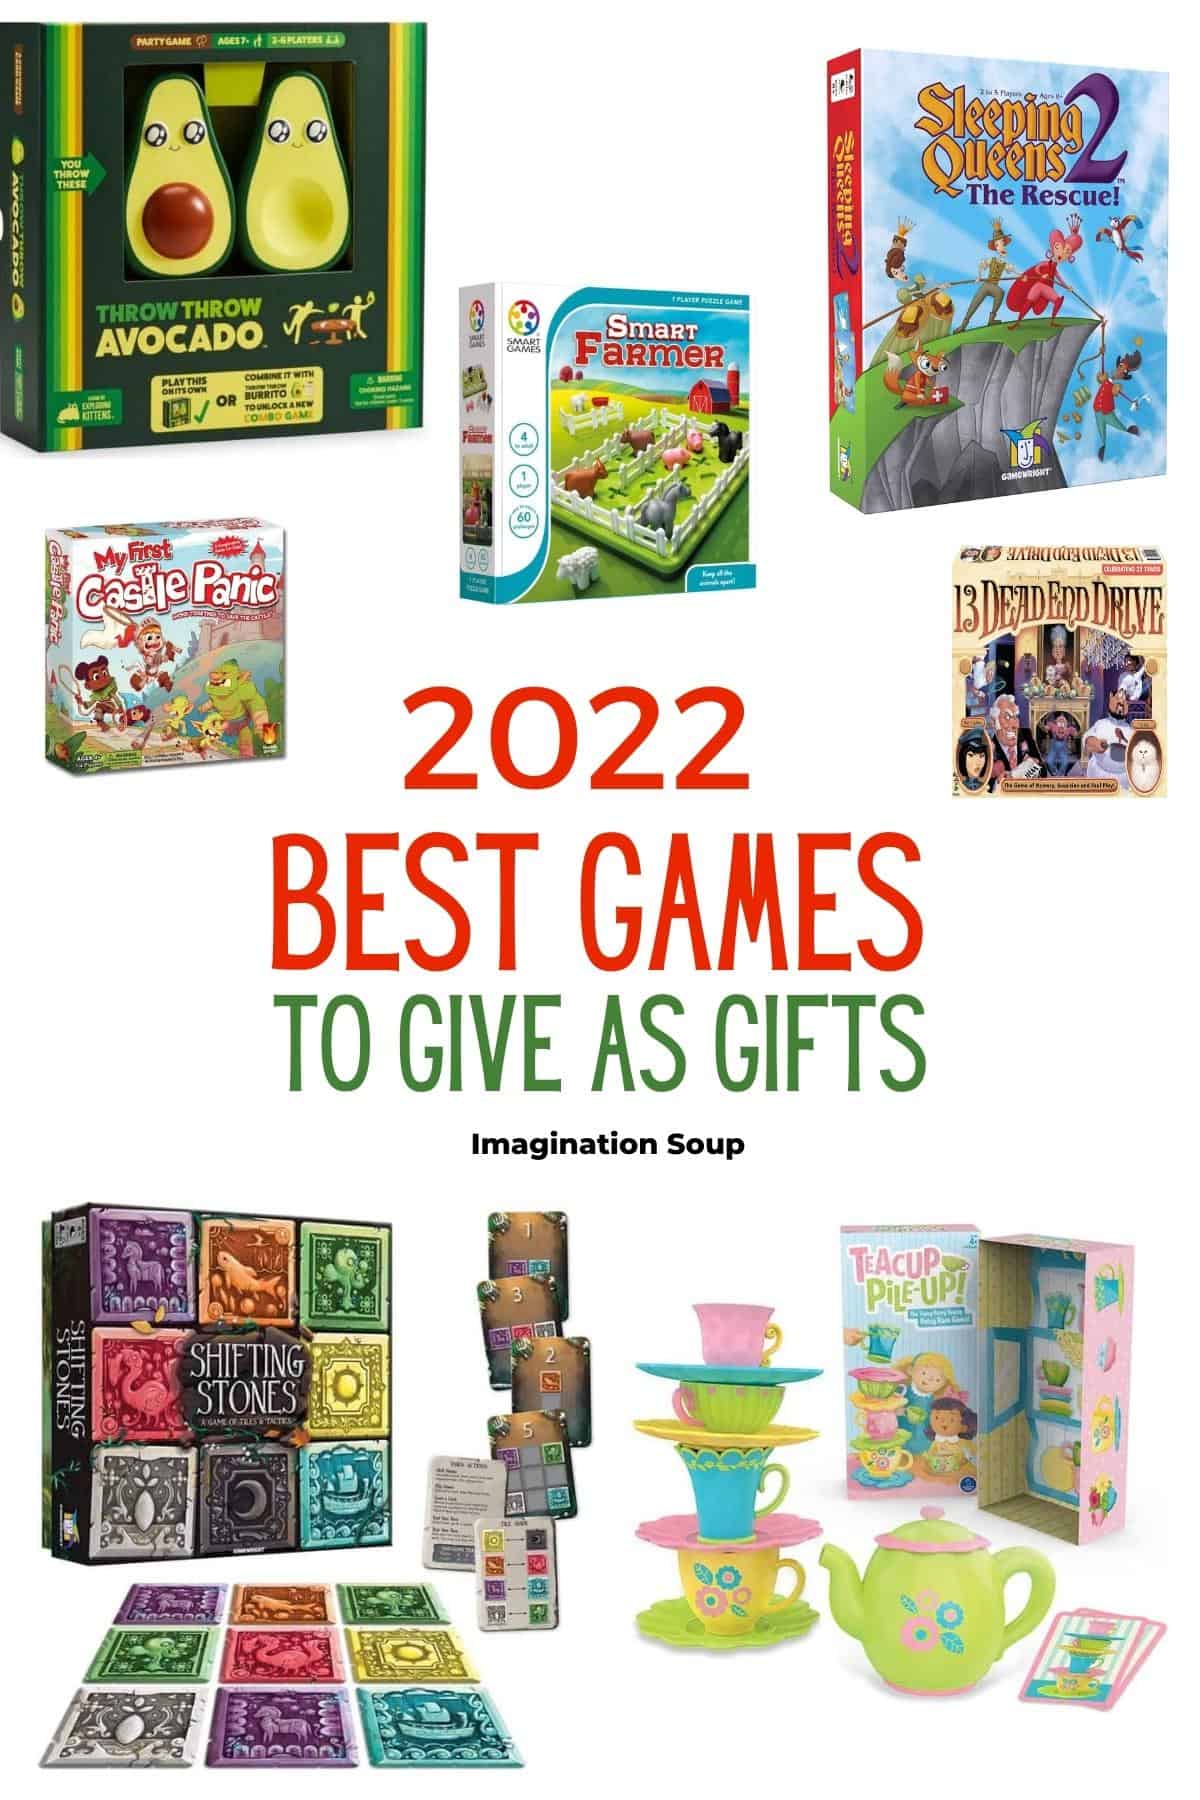 2022 games for kids to give as gifts